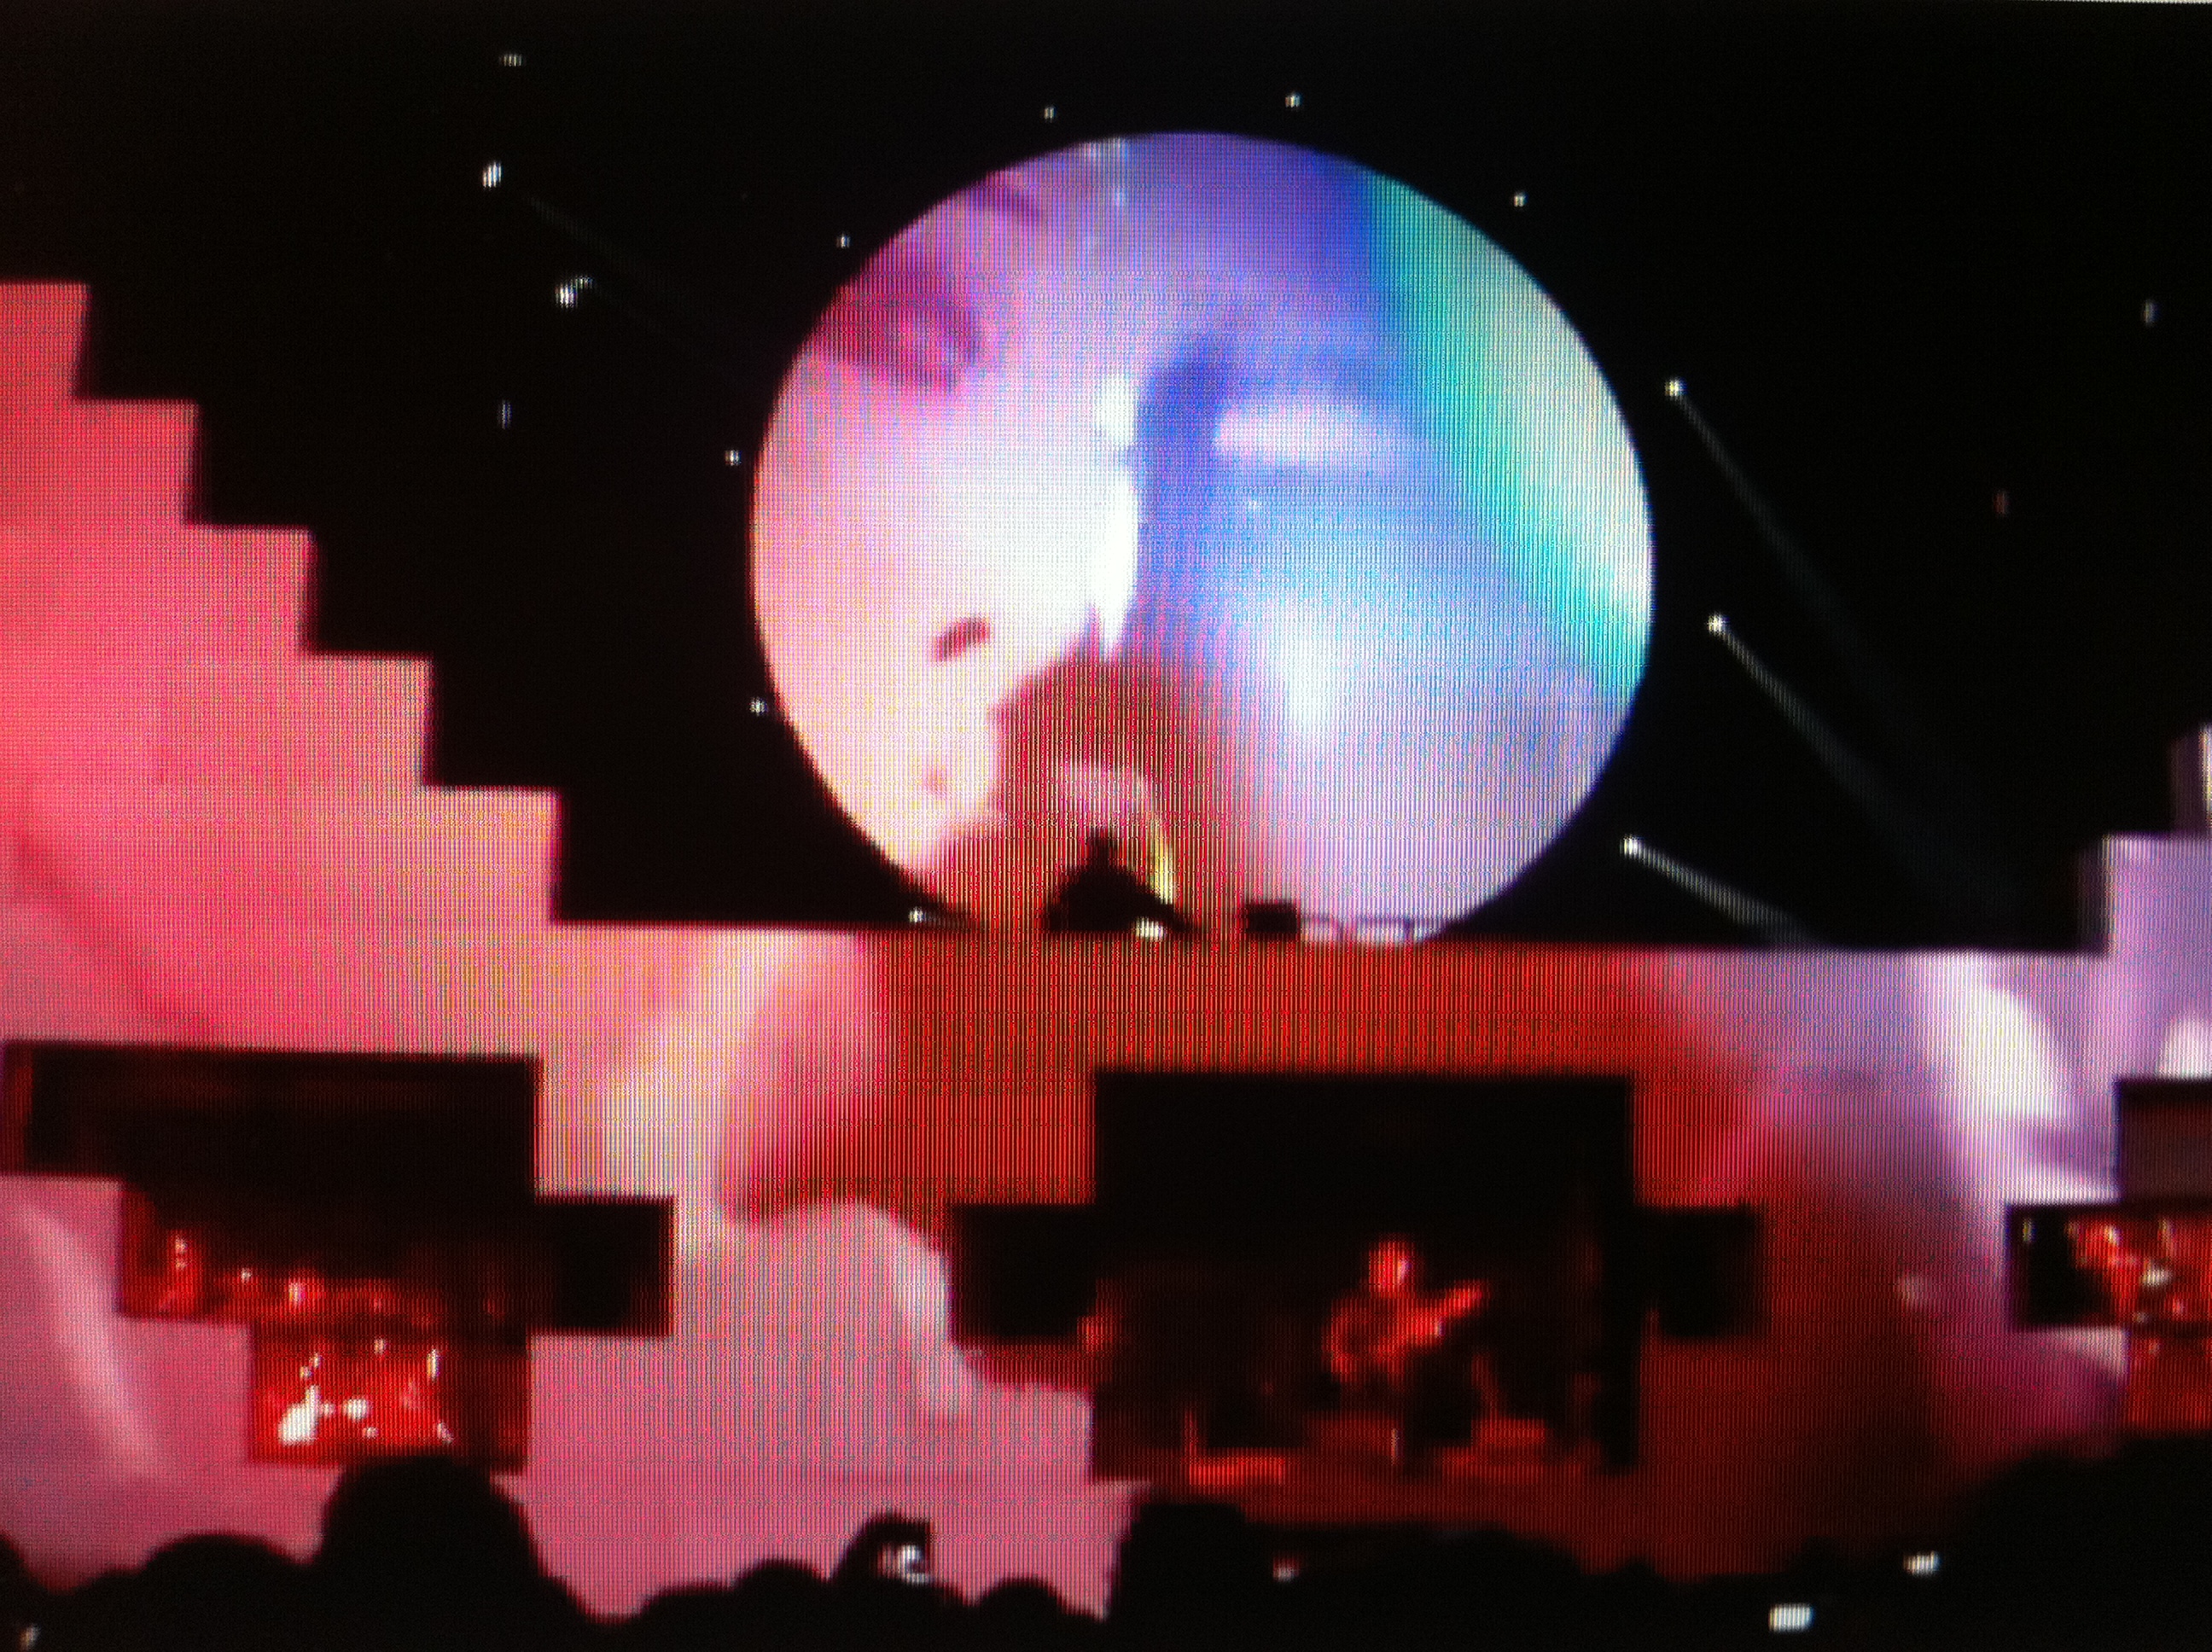 Live video for: Roger waters(Pink Floyd)